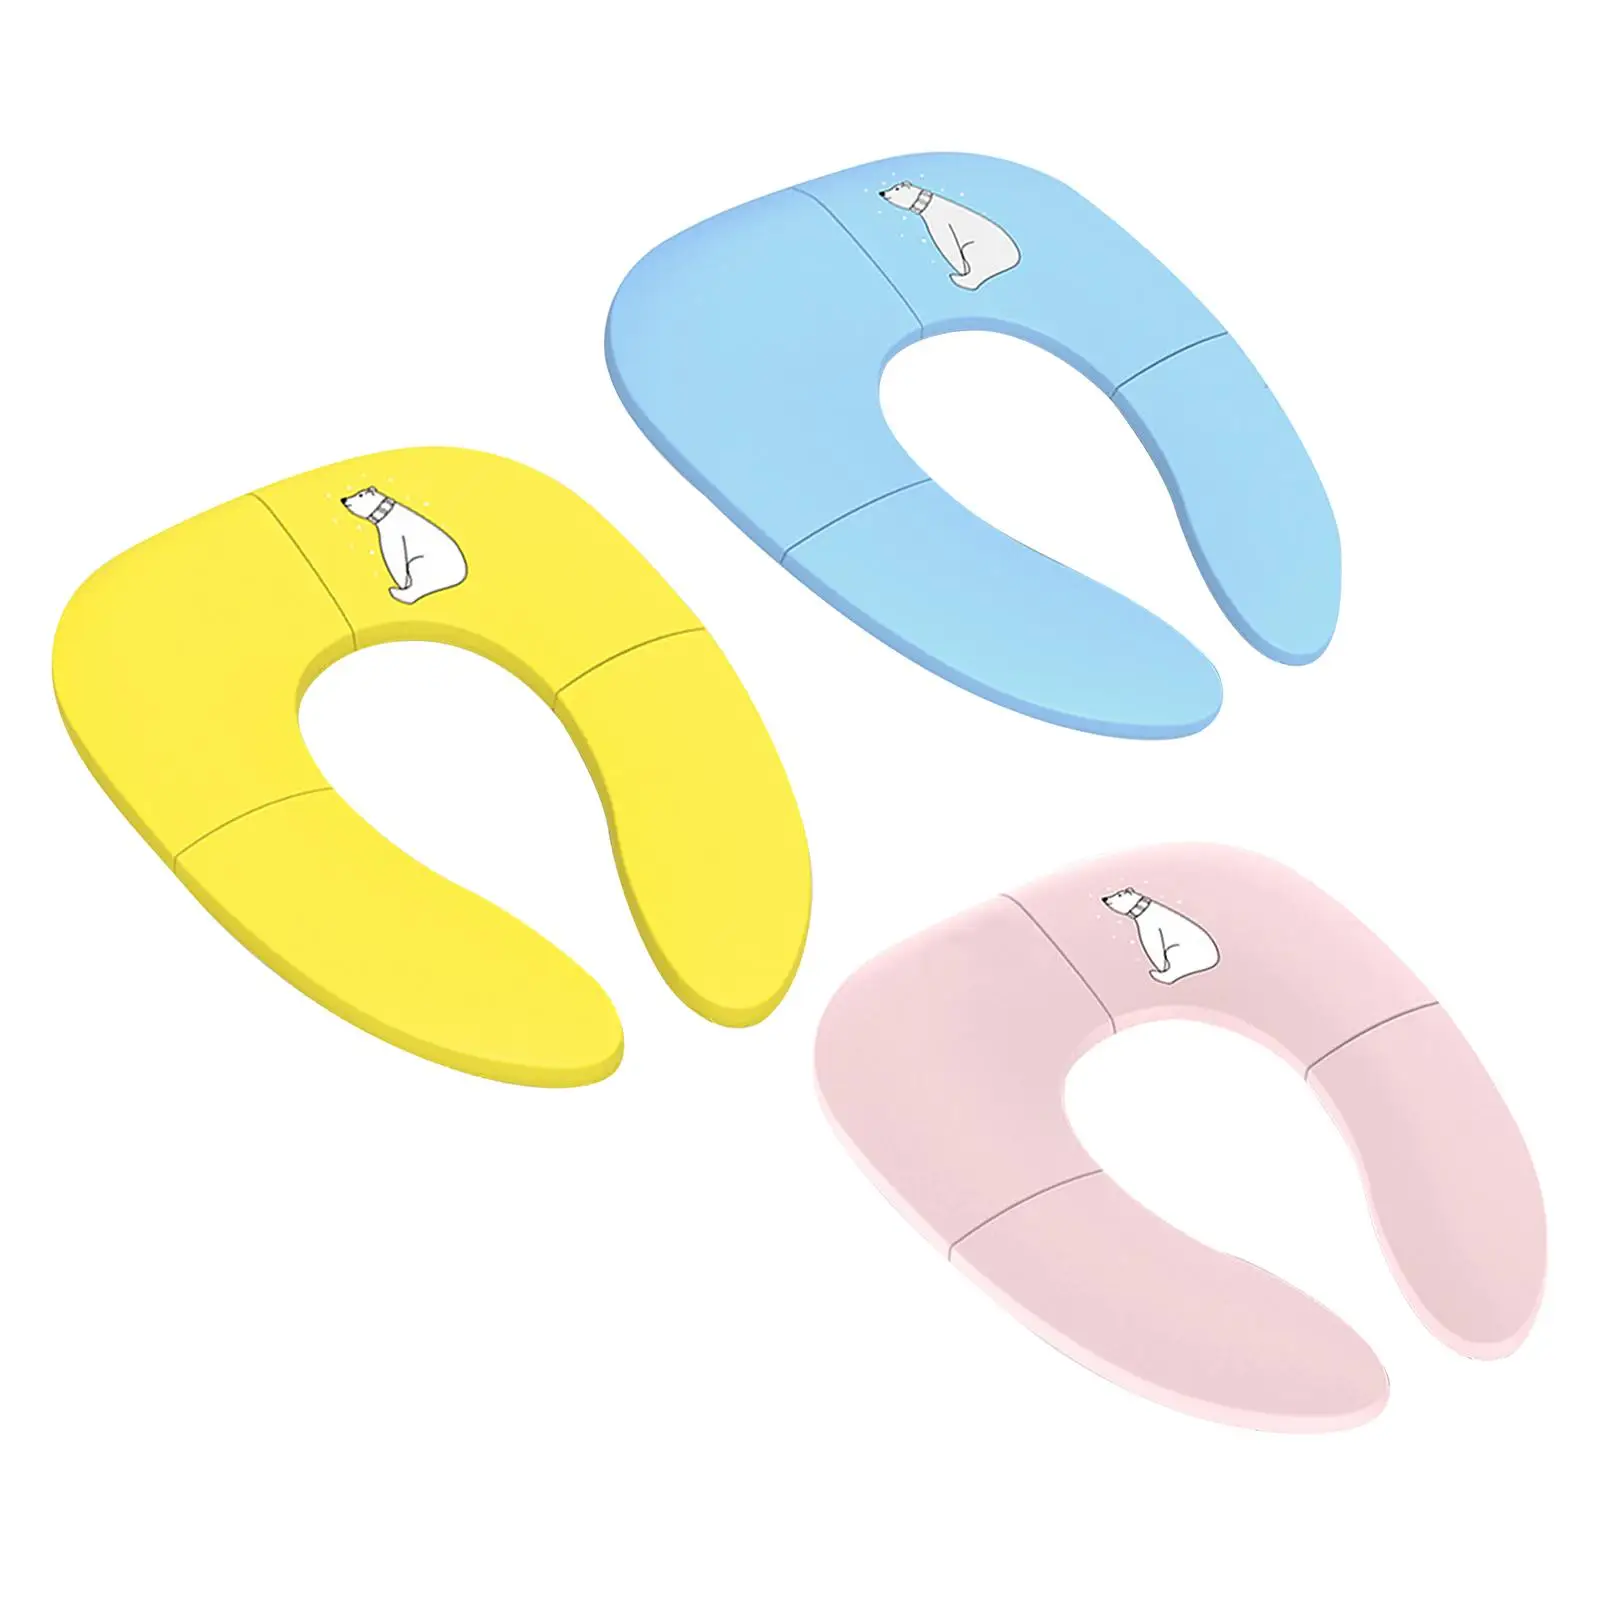 Foldable Toilet Seat Portable Upgraded Toilet Cover for Home Use girls Kids